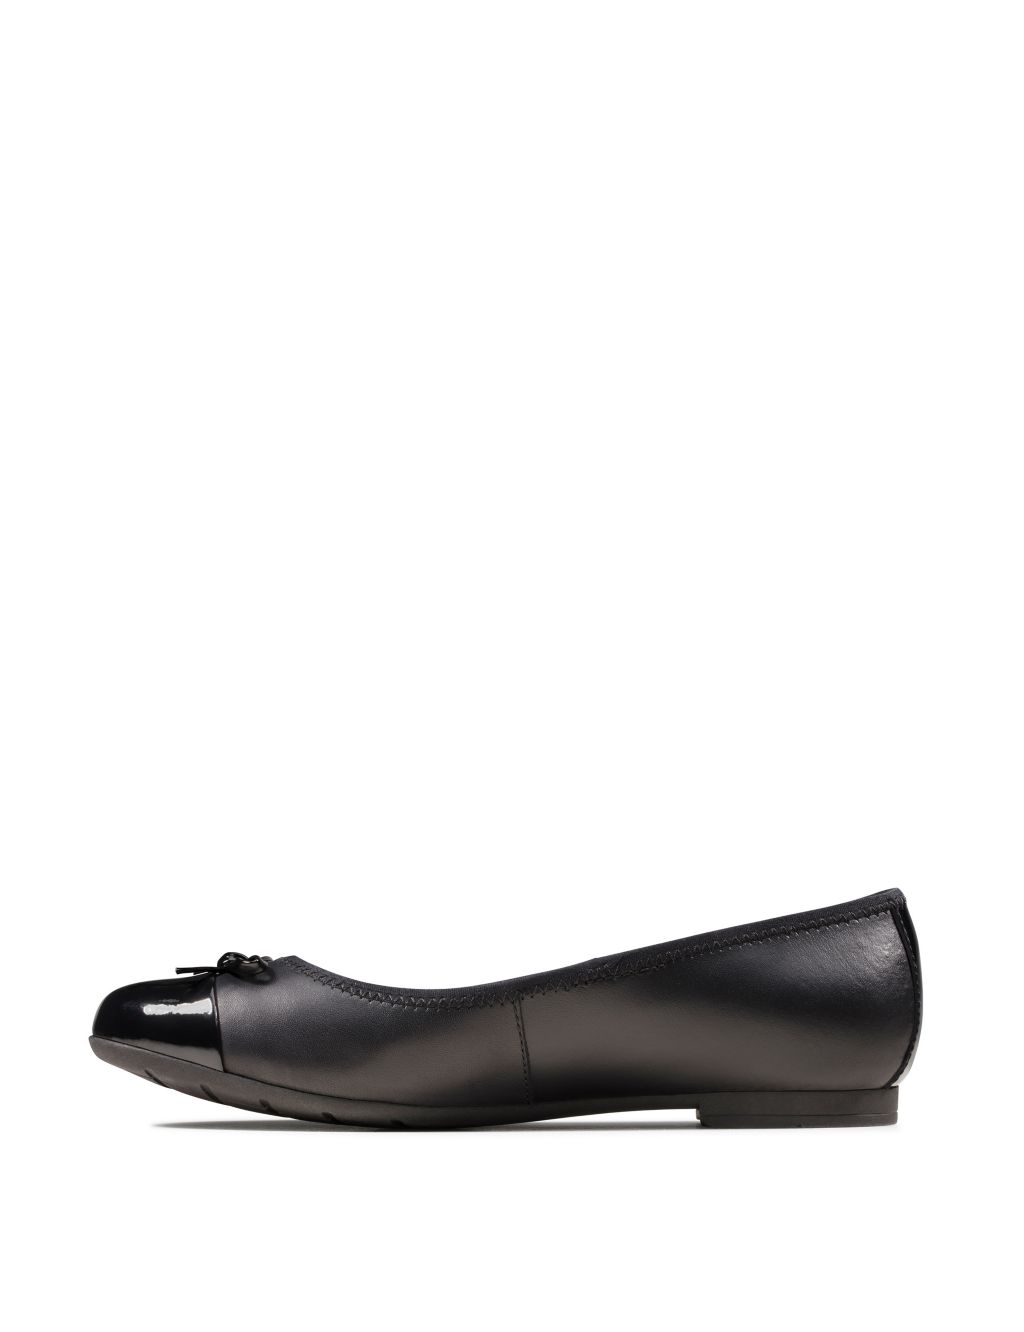 Kids' Leather Bow Ballet Pumps (3 Small - 5½ Small) image 6